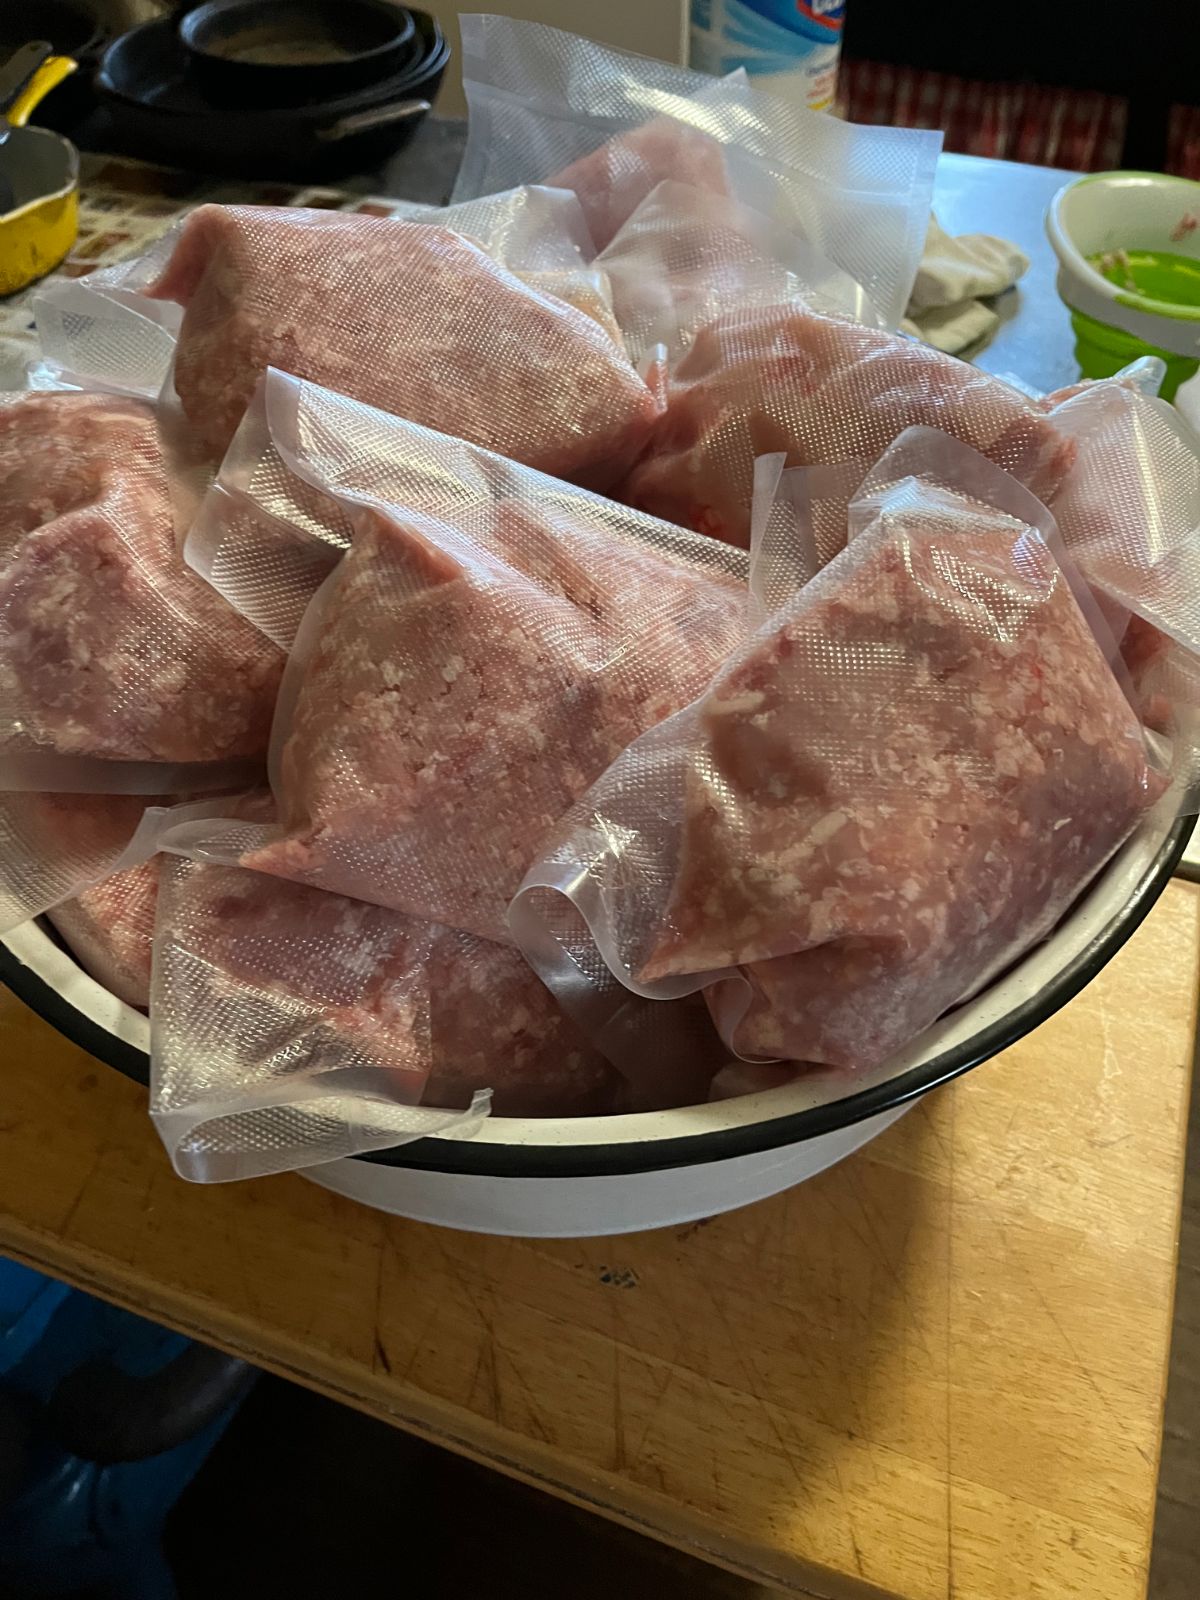 Packages of fresh ground rabbit meat